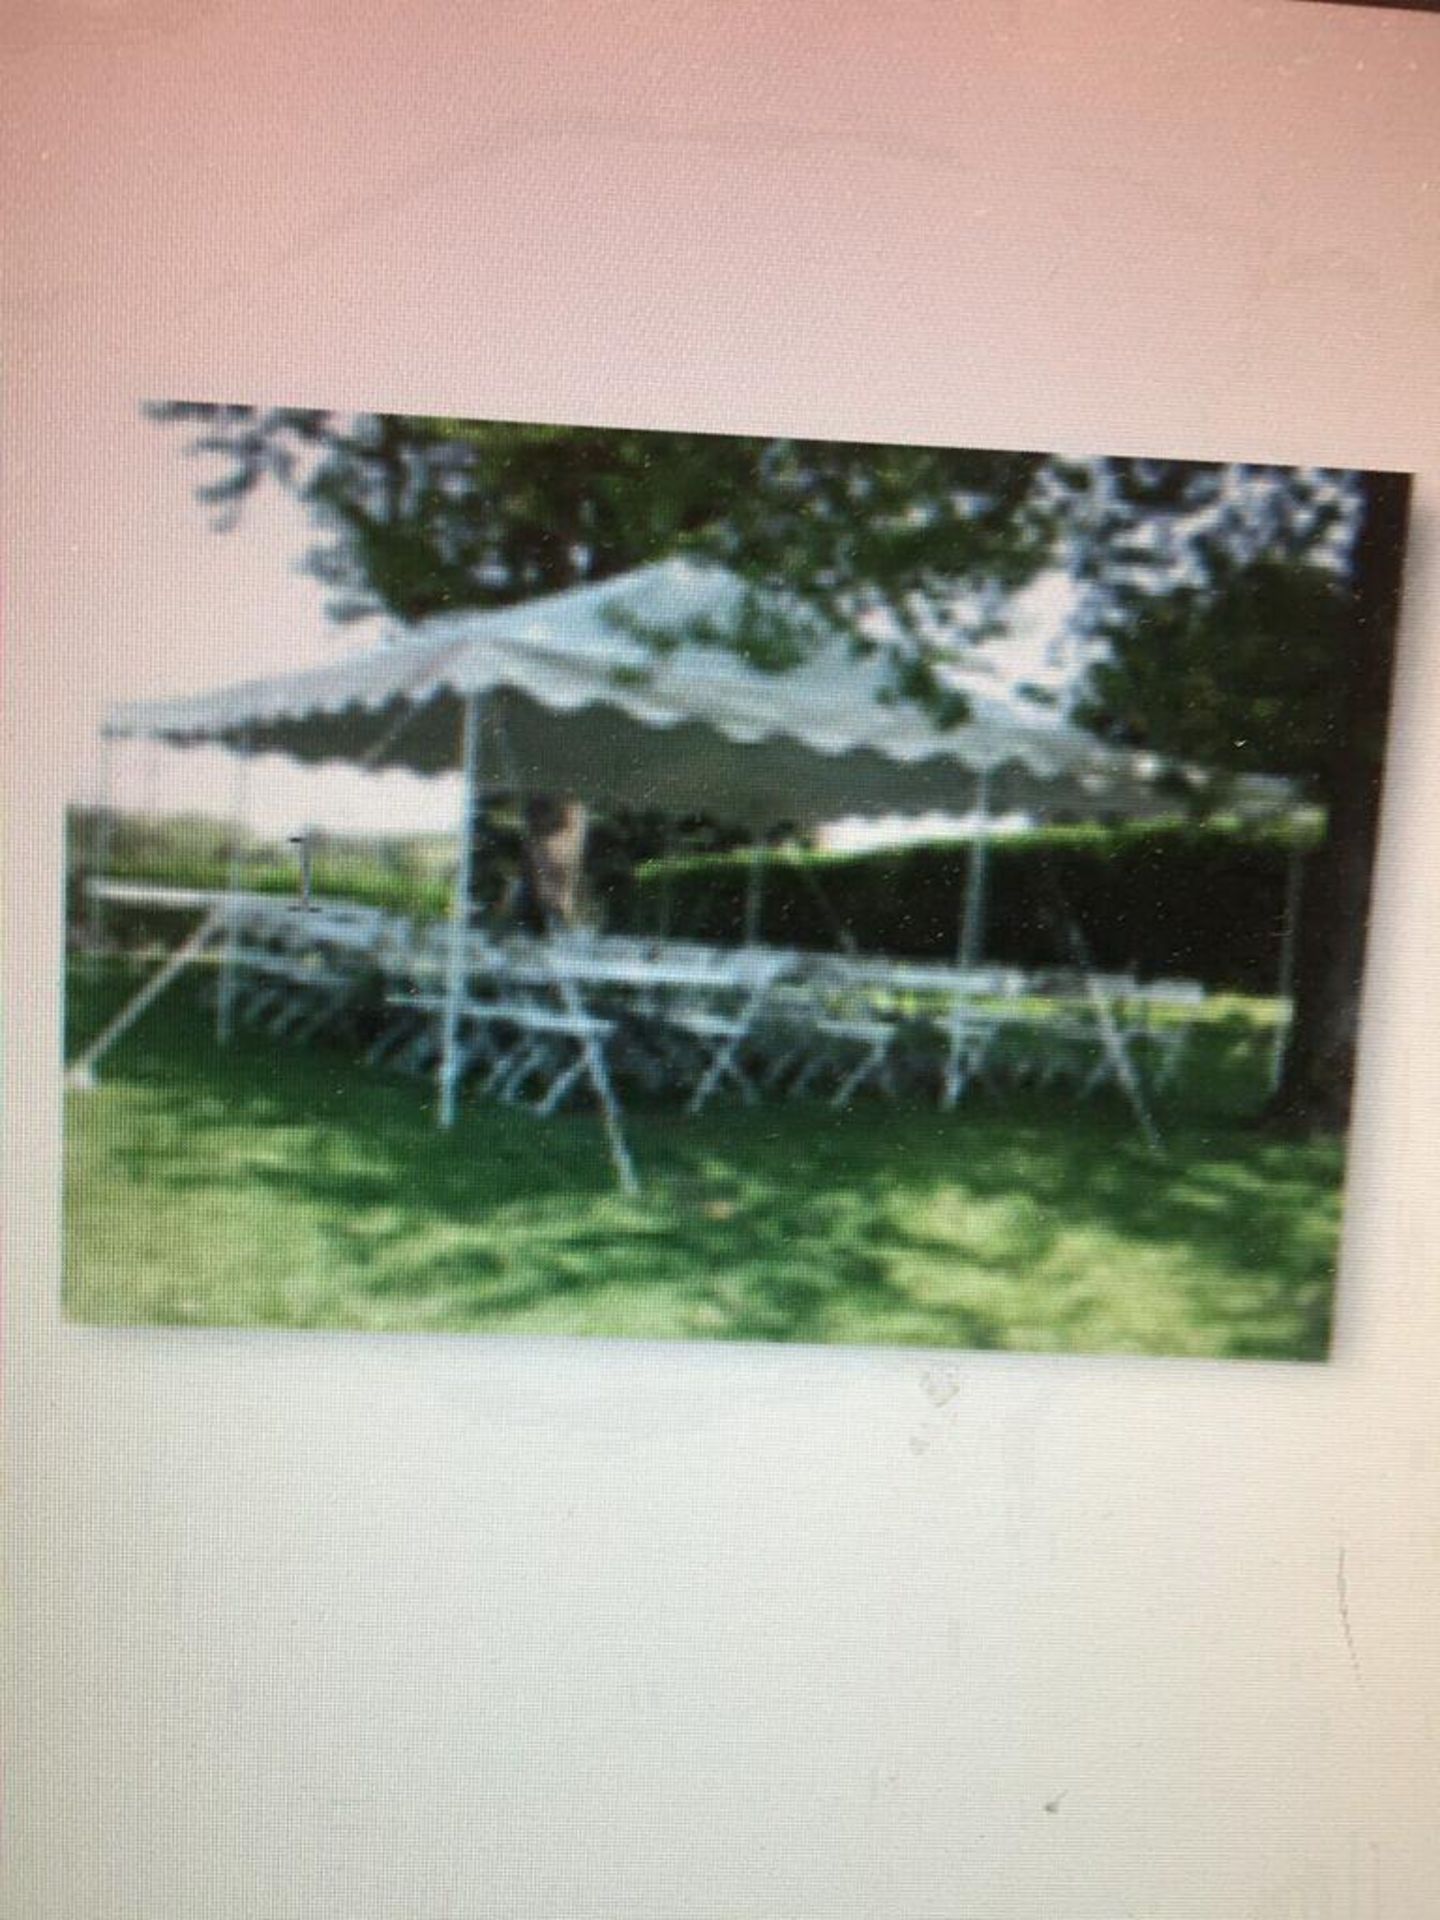 16' x 16' white canopy tent, with poles, stakes, and straps etc. - Image 4 of 4